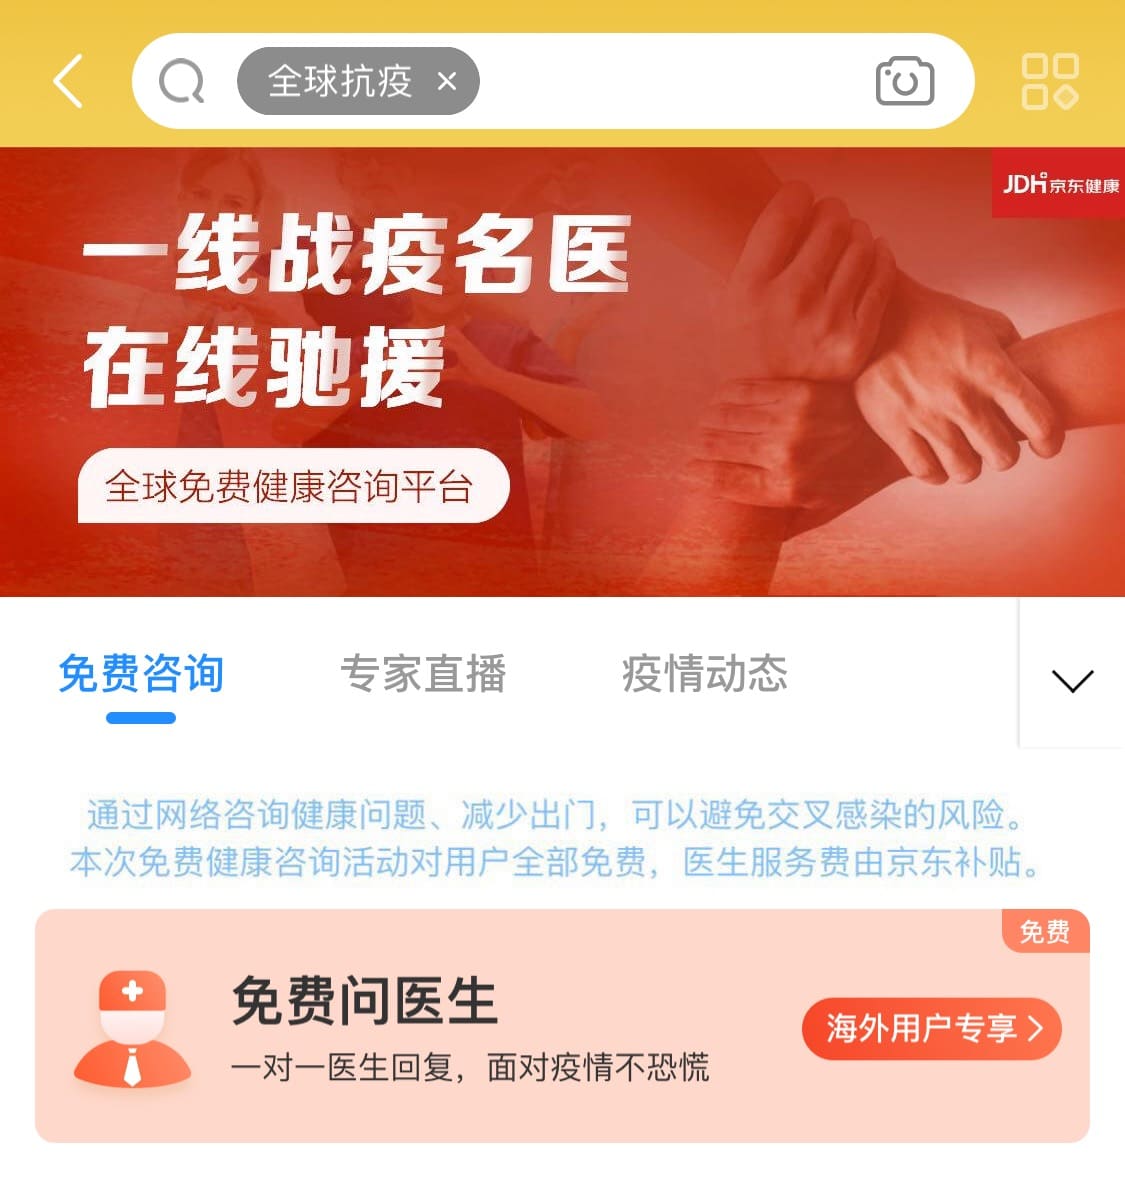 Patients simply need to type in key words “全球抗疫” in JD’s app to log onto the platform.